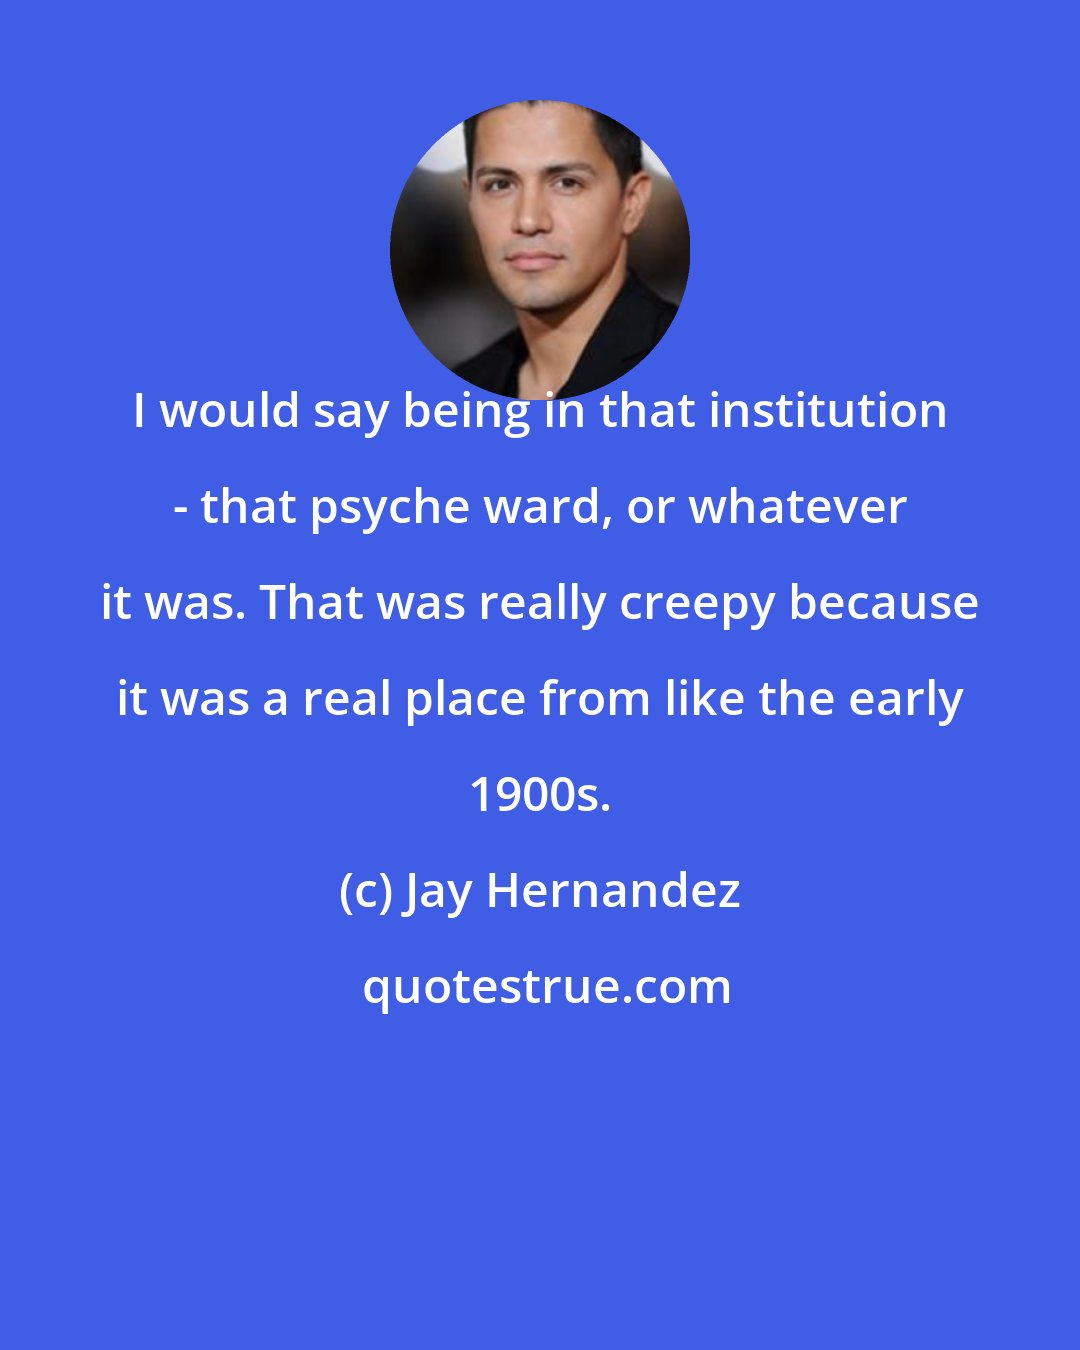 Jay Hernandez: I would say being in that institution - that psyche ward, or whatever it was. That was really creepy because it was a real place from like the early 1900s.